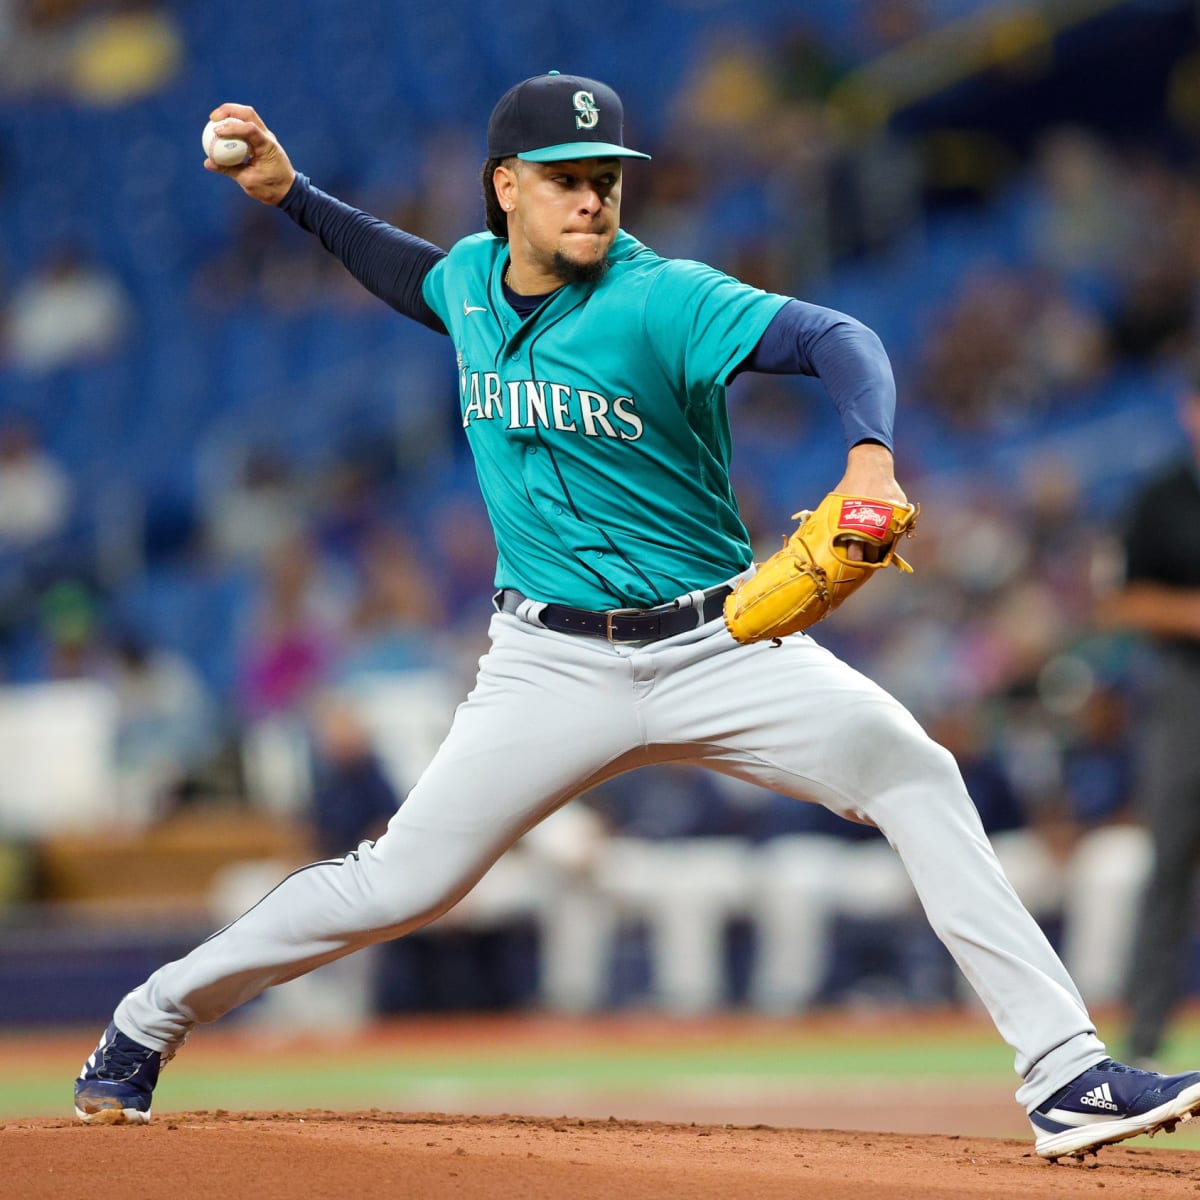 Luis Castillo strikes out 8, surging Mariners drop A's 5-1